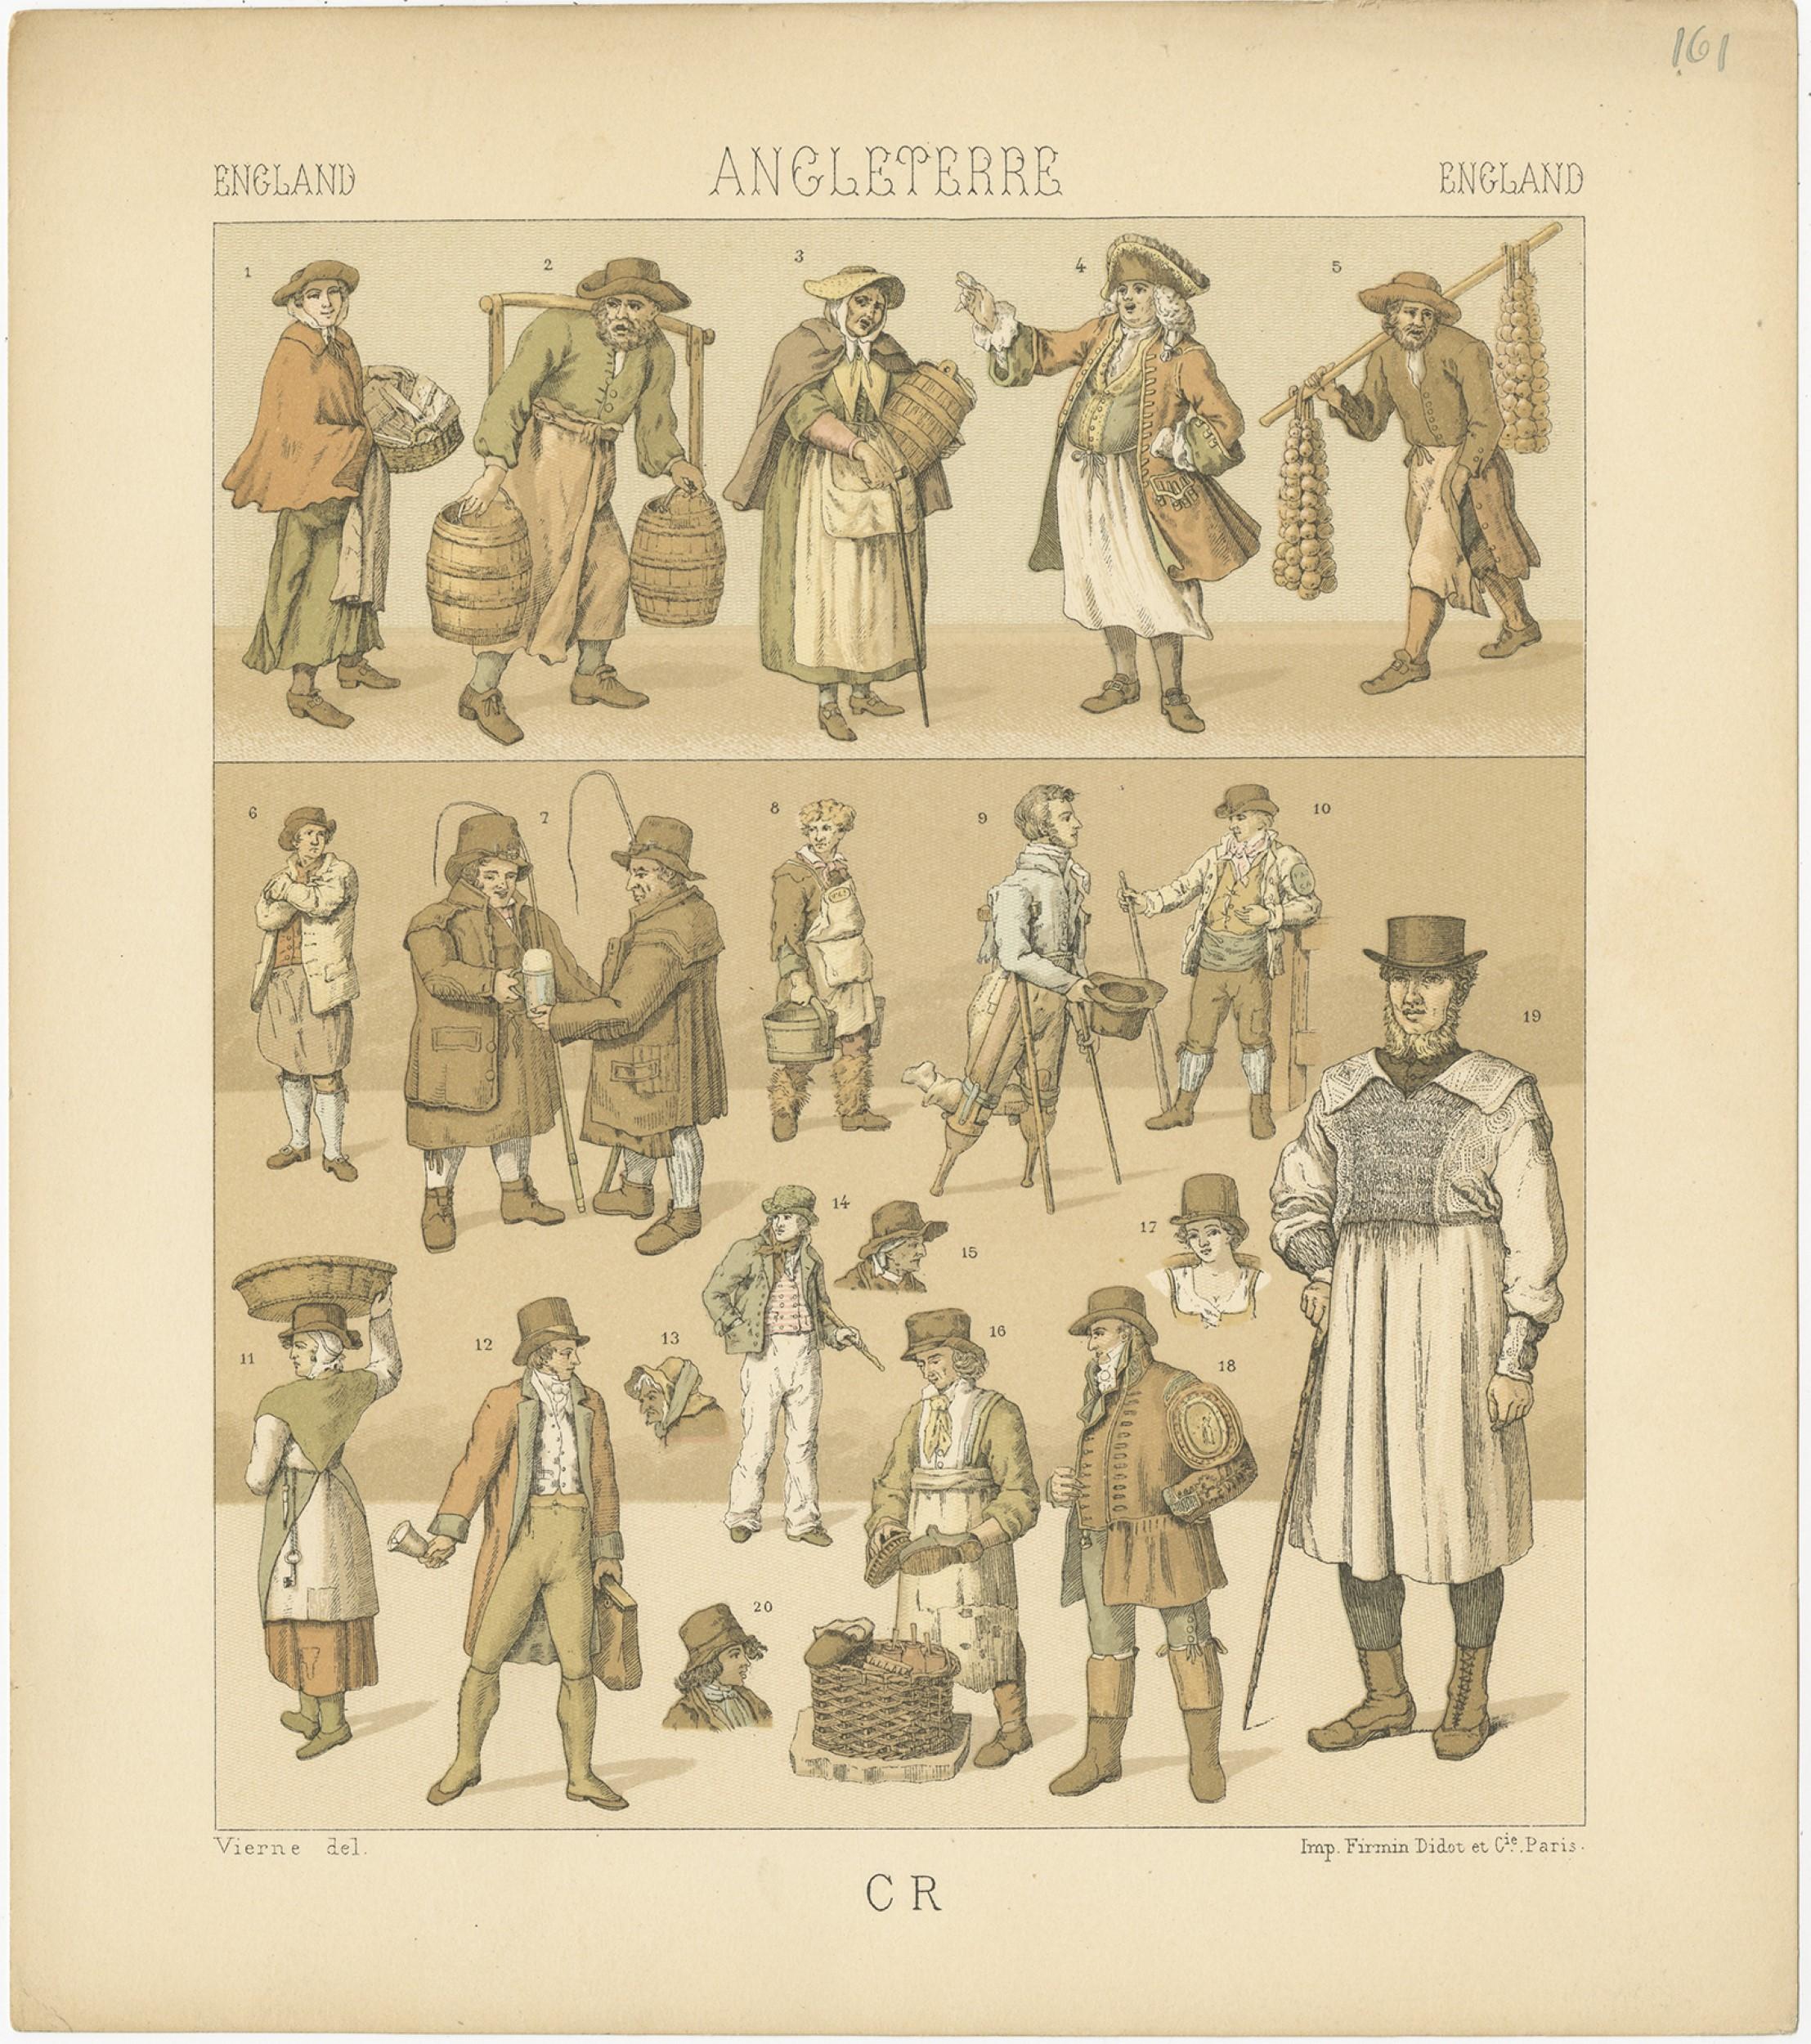 Antique print titled 'England - Angleterre - England'. Chromolithograph of English Outfits. This print originates from 'Le Costume Historique' by M.A. Racinet. Published, circa 1880.
 
   